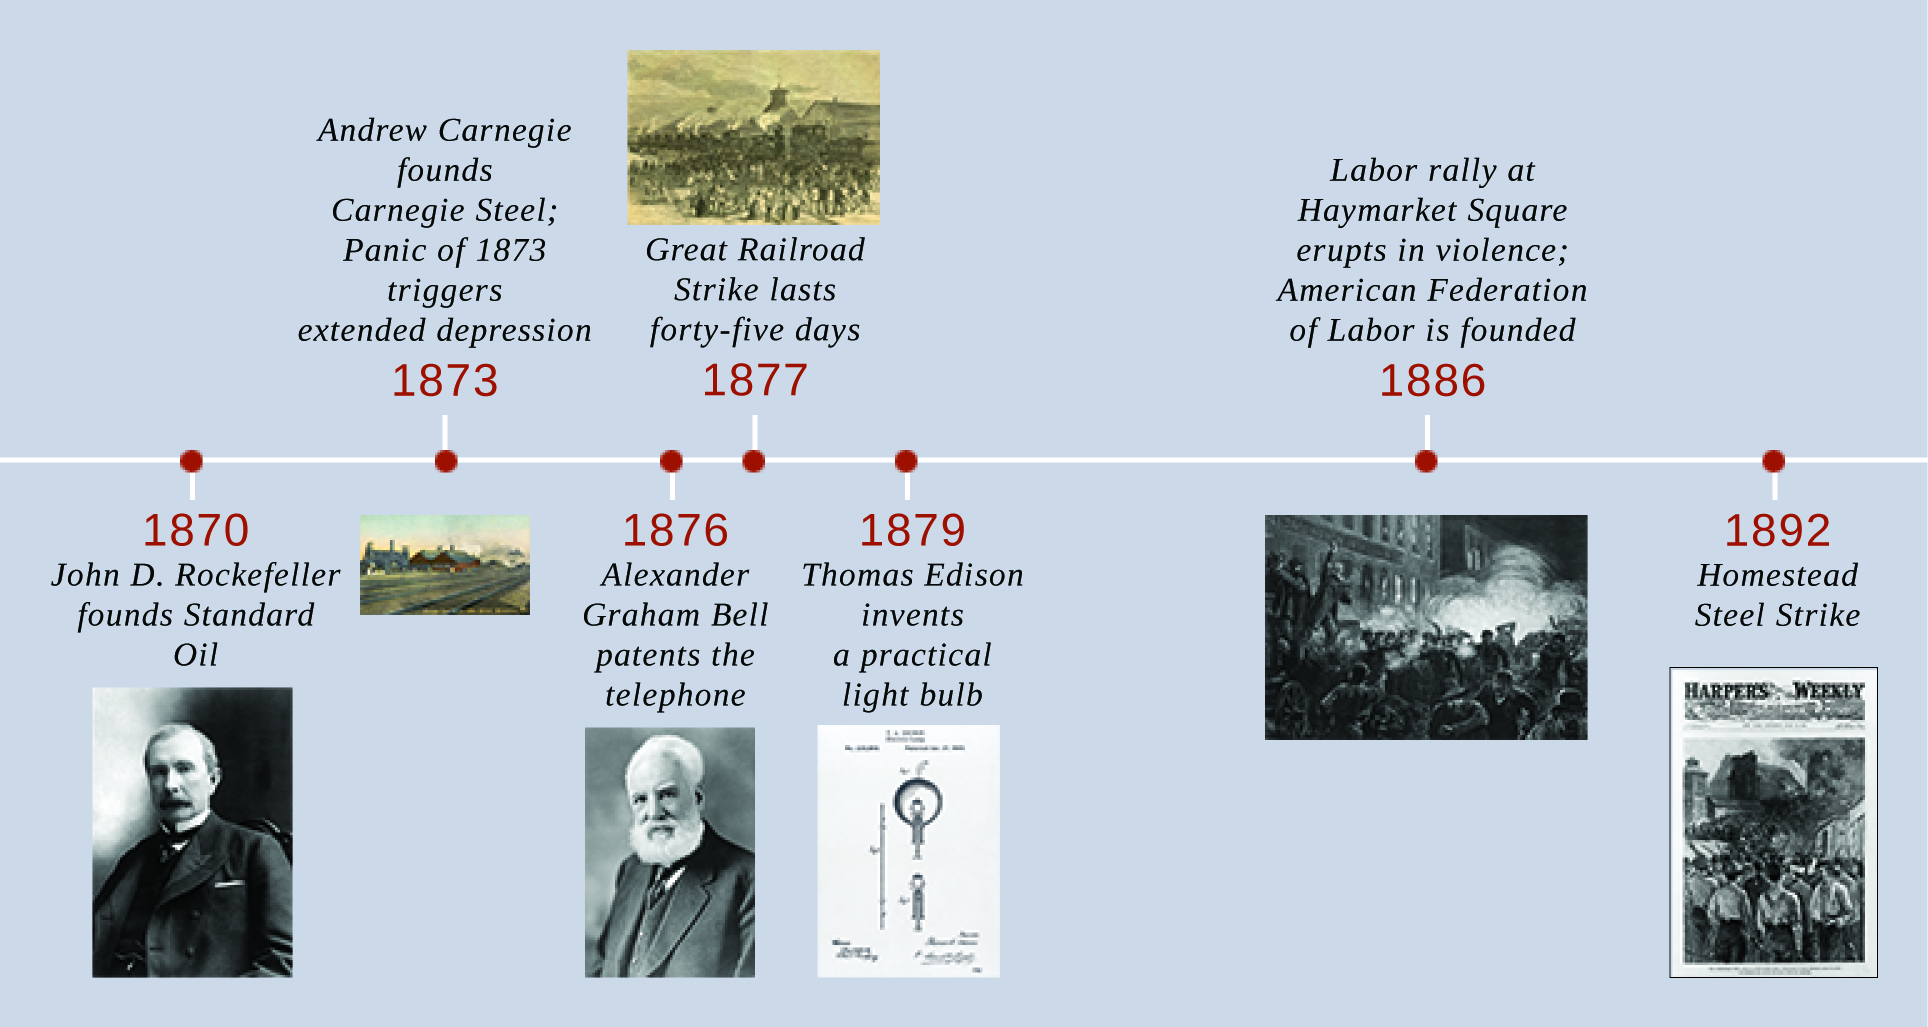 A timeline shows important events of the era. In 1870, John D. Rockefeller founds Standard Oil; a photograph of Rockefeller is shown. In 1873, Andrew Carnegie founds Carnegie Steel, and the Panic of 1873 triggers extended depression; a drawing of the Carnegie Steel factory is shown. In 1876, Alexander Graham Bell patents the telephone; a photograph of Bell is shown. In 1877, the Great Railroad Strike lasts forty-five days; a drawing of the strike is shown. In 1879, Thomas Edison invents a practical light bulb; a diagram of Edison’s incandescent light bulb is shown. In 1886, a labor rally at Haymarket Square erupts in violence, and the American Federation of Labor is founded; an engraving depicting the Haymarket violence is shown. In 1892, the Homestead Steel Strike occurs; a magazine cover with a drawing of the newly surrendered strikers is shown.